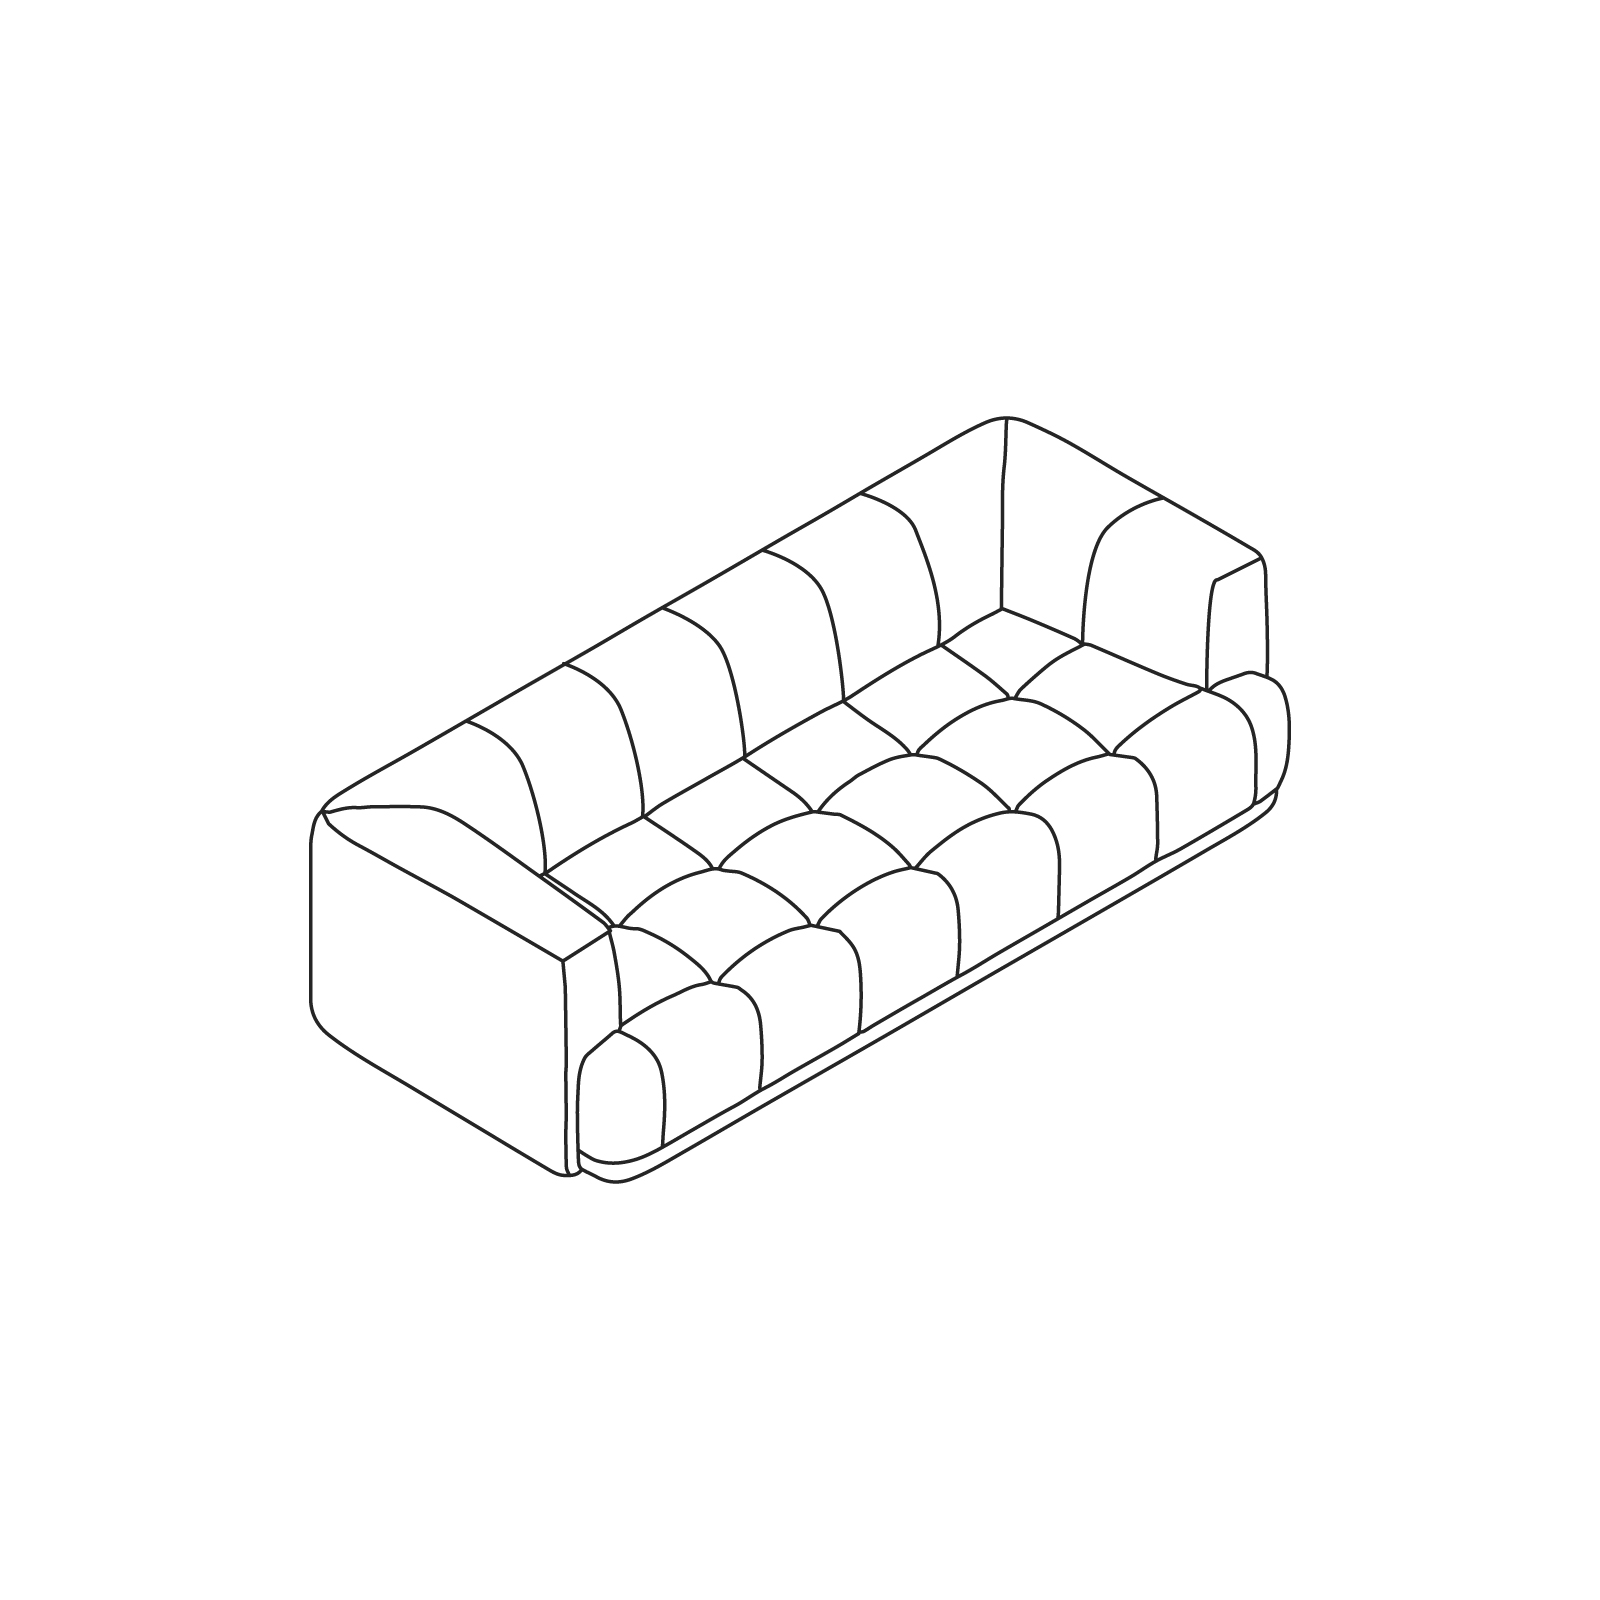 A line drawing - Quilton Sofa